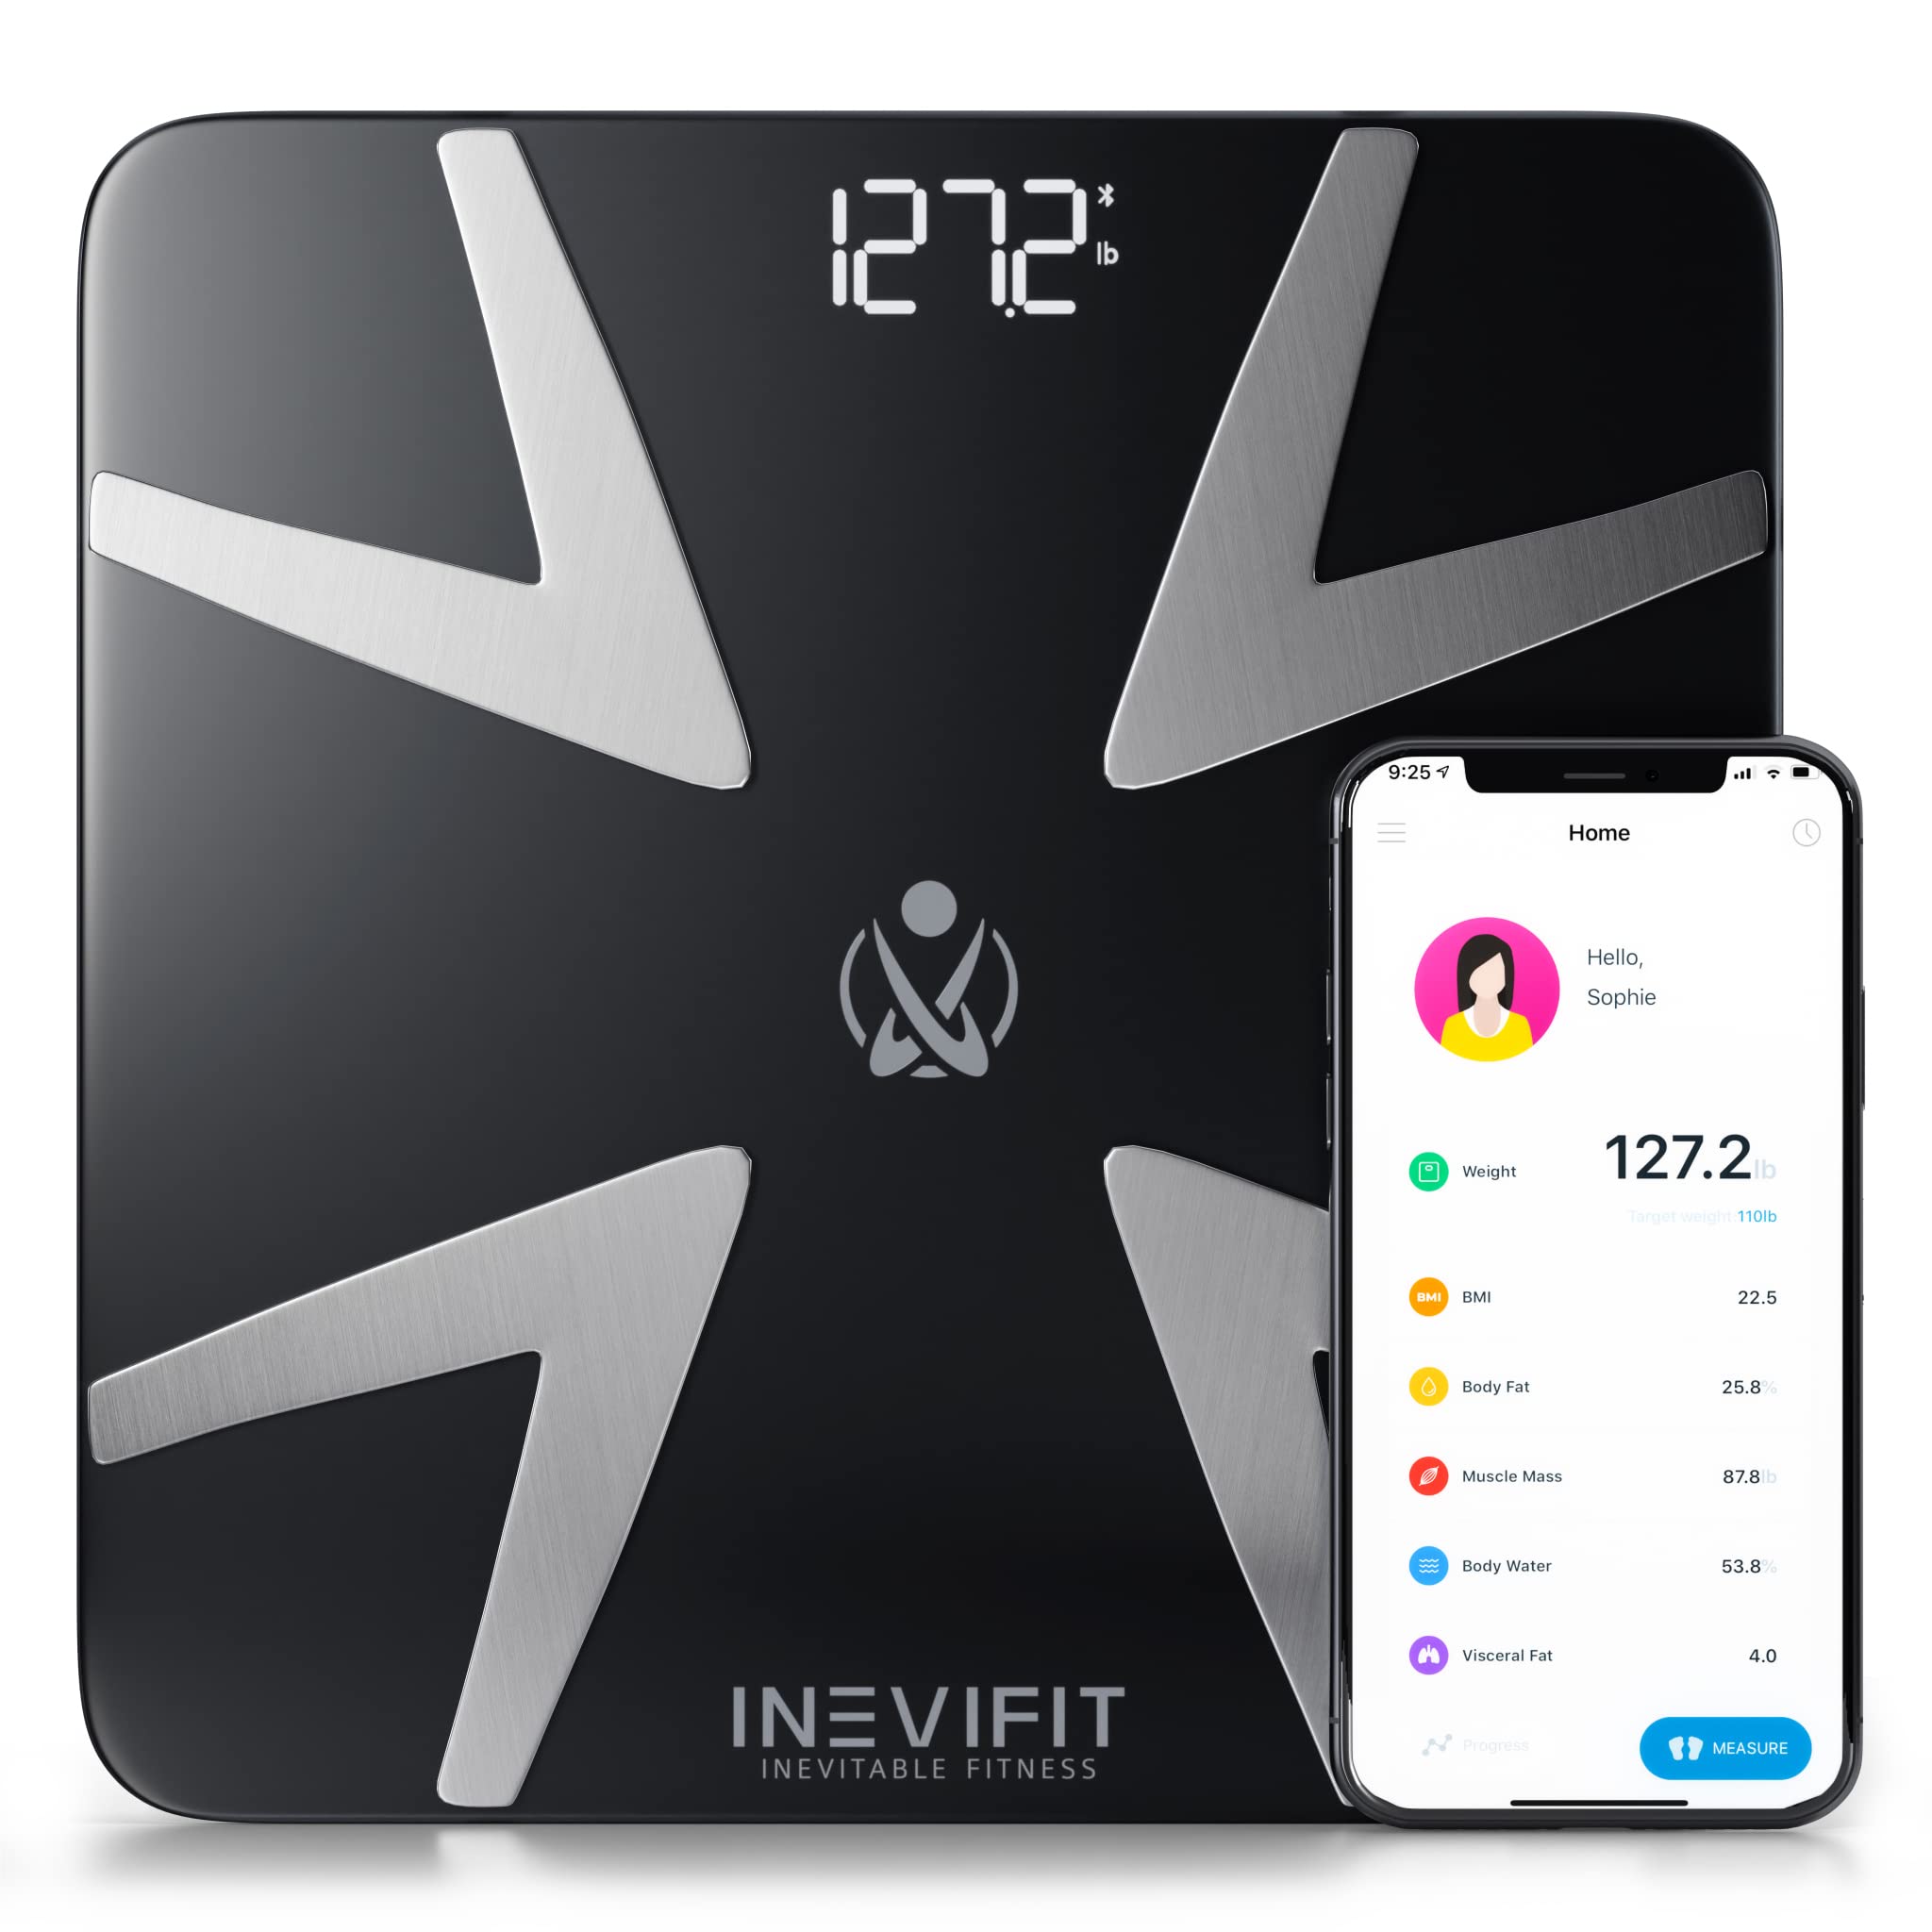 INEVIFIT Bathroom Scale, Highly Accurate Digital Bathroom Body Scale, Precisely